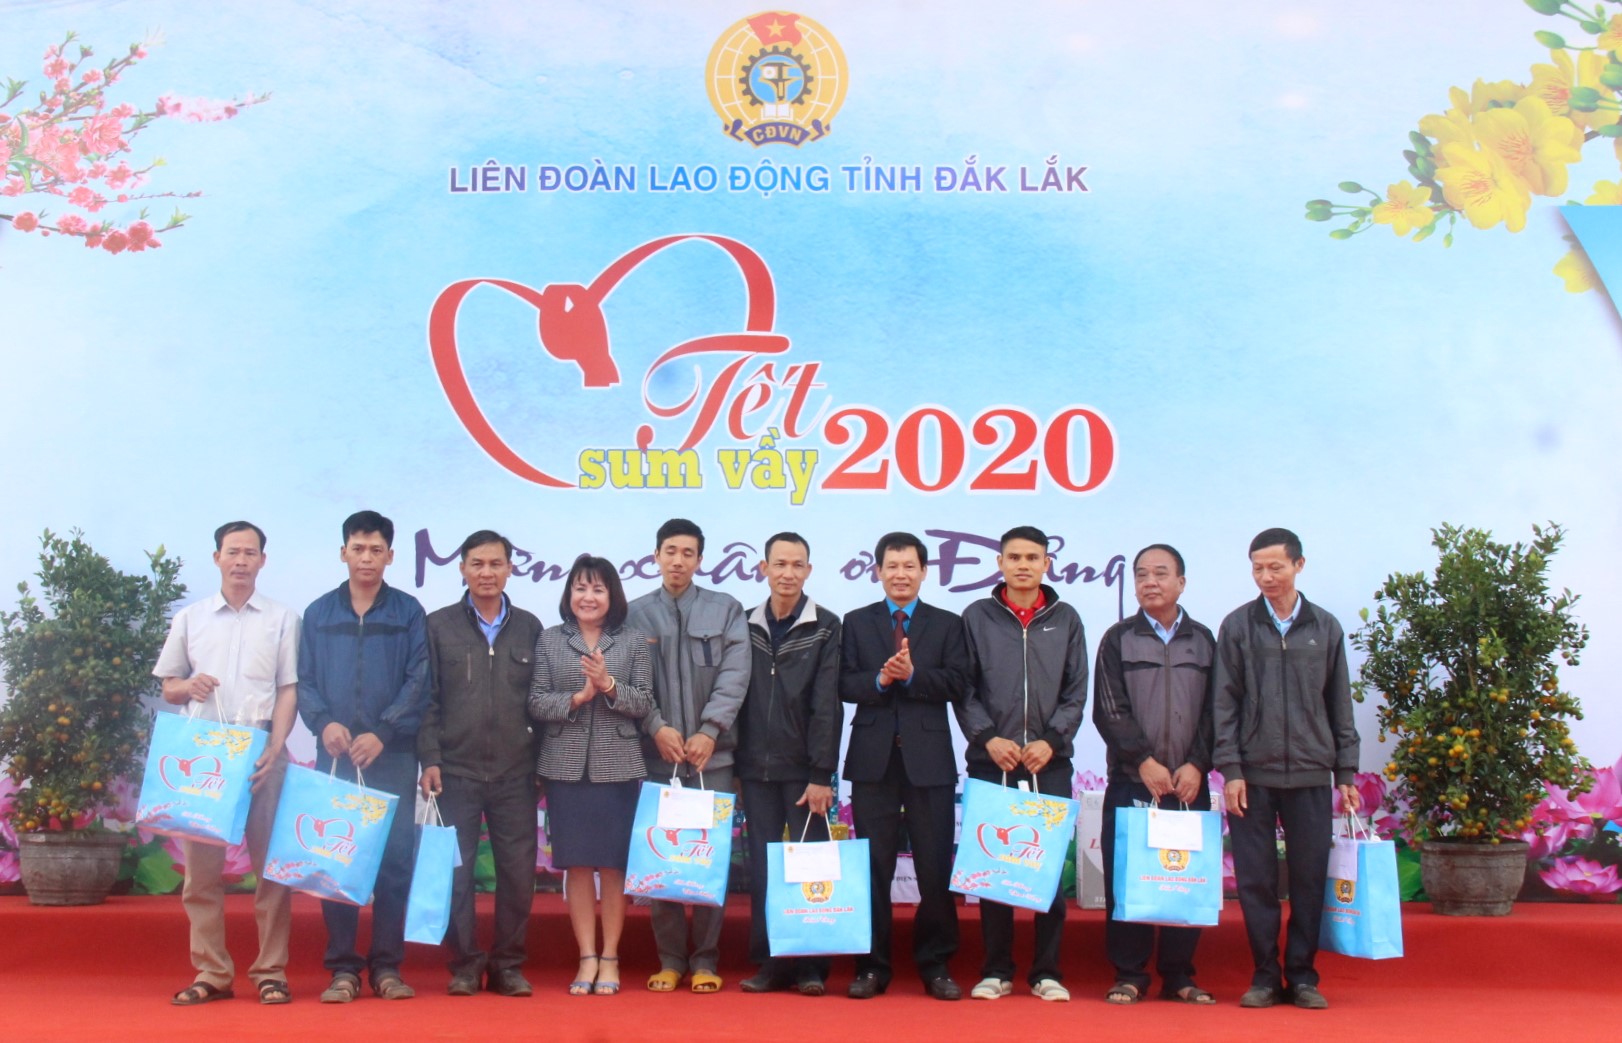 Programme “Tet Reunion 2020”: Offering 240 gifts to workers